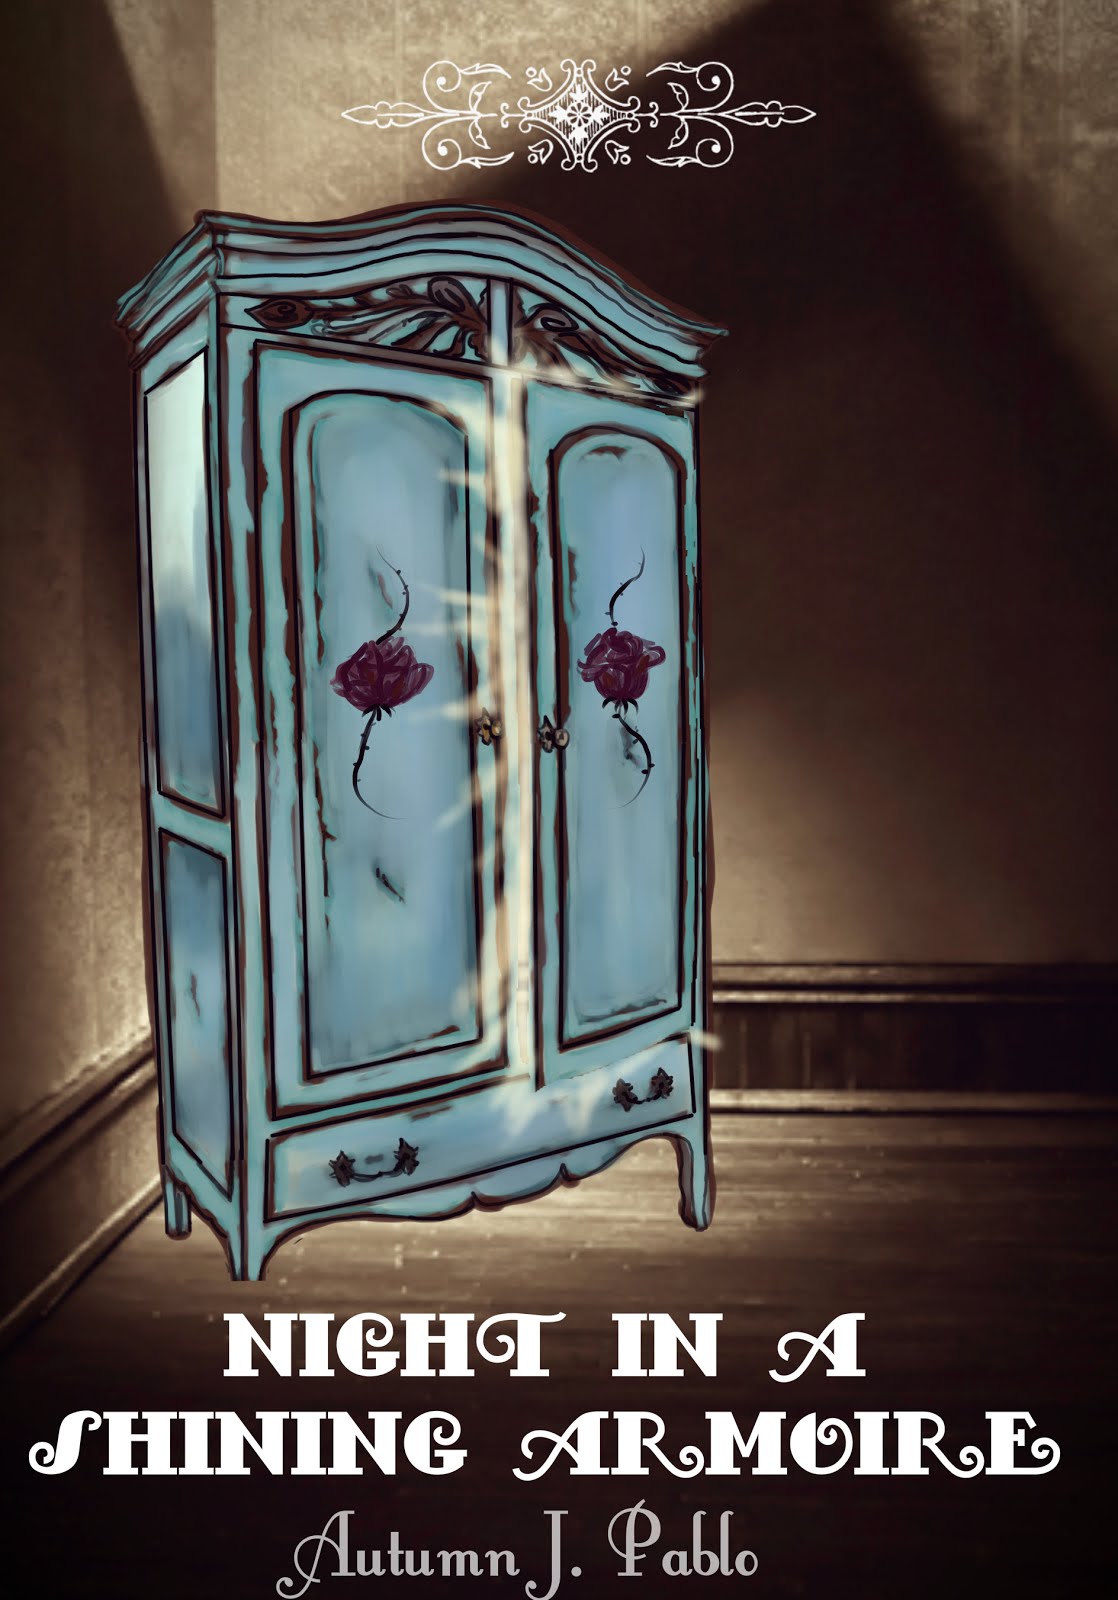  A Night In A Shining Armoire